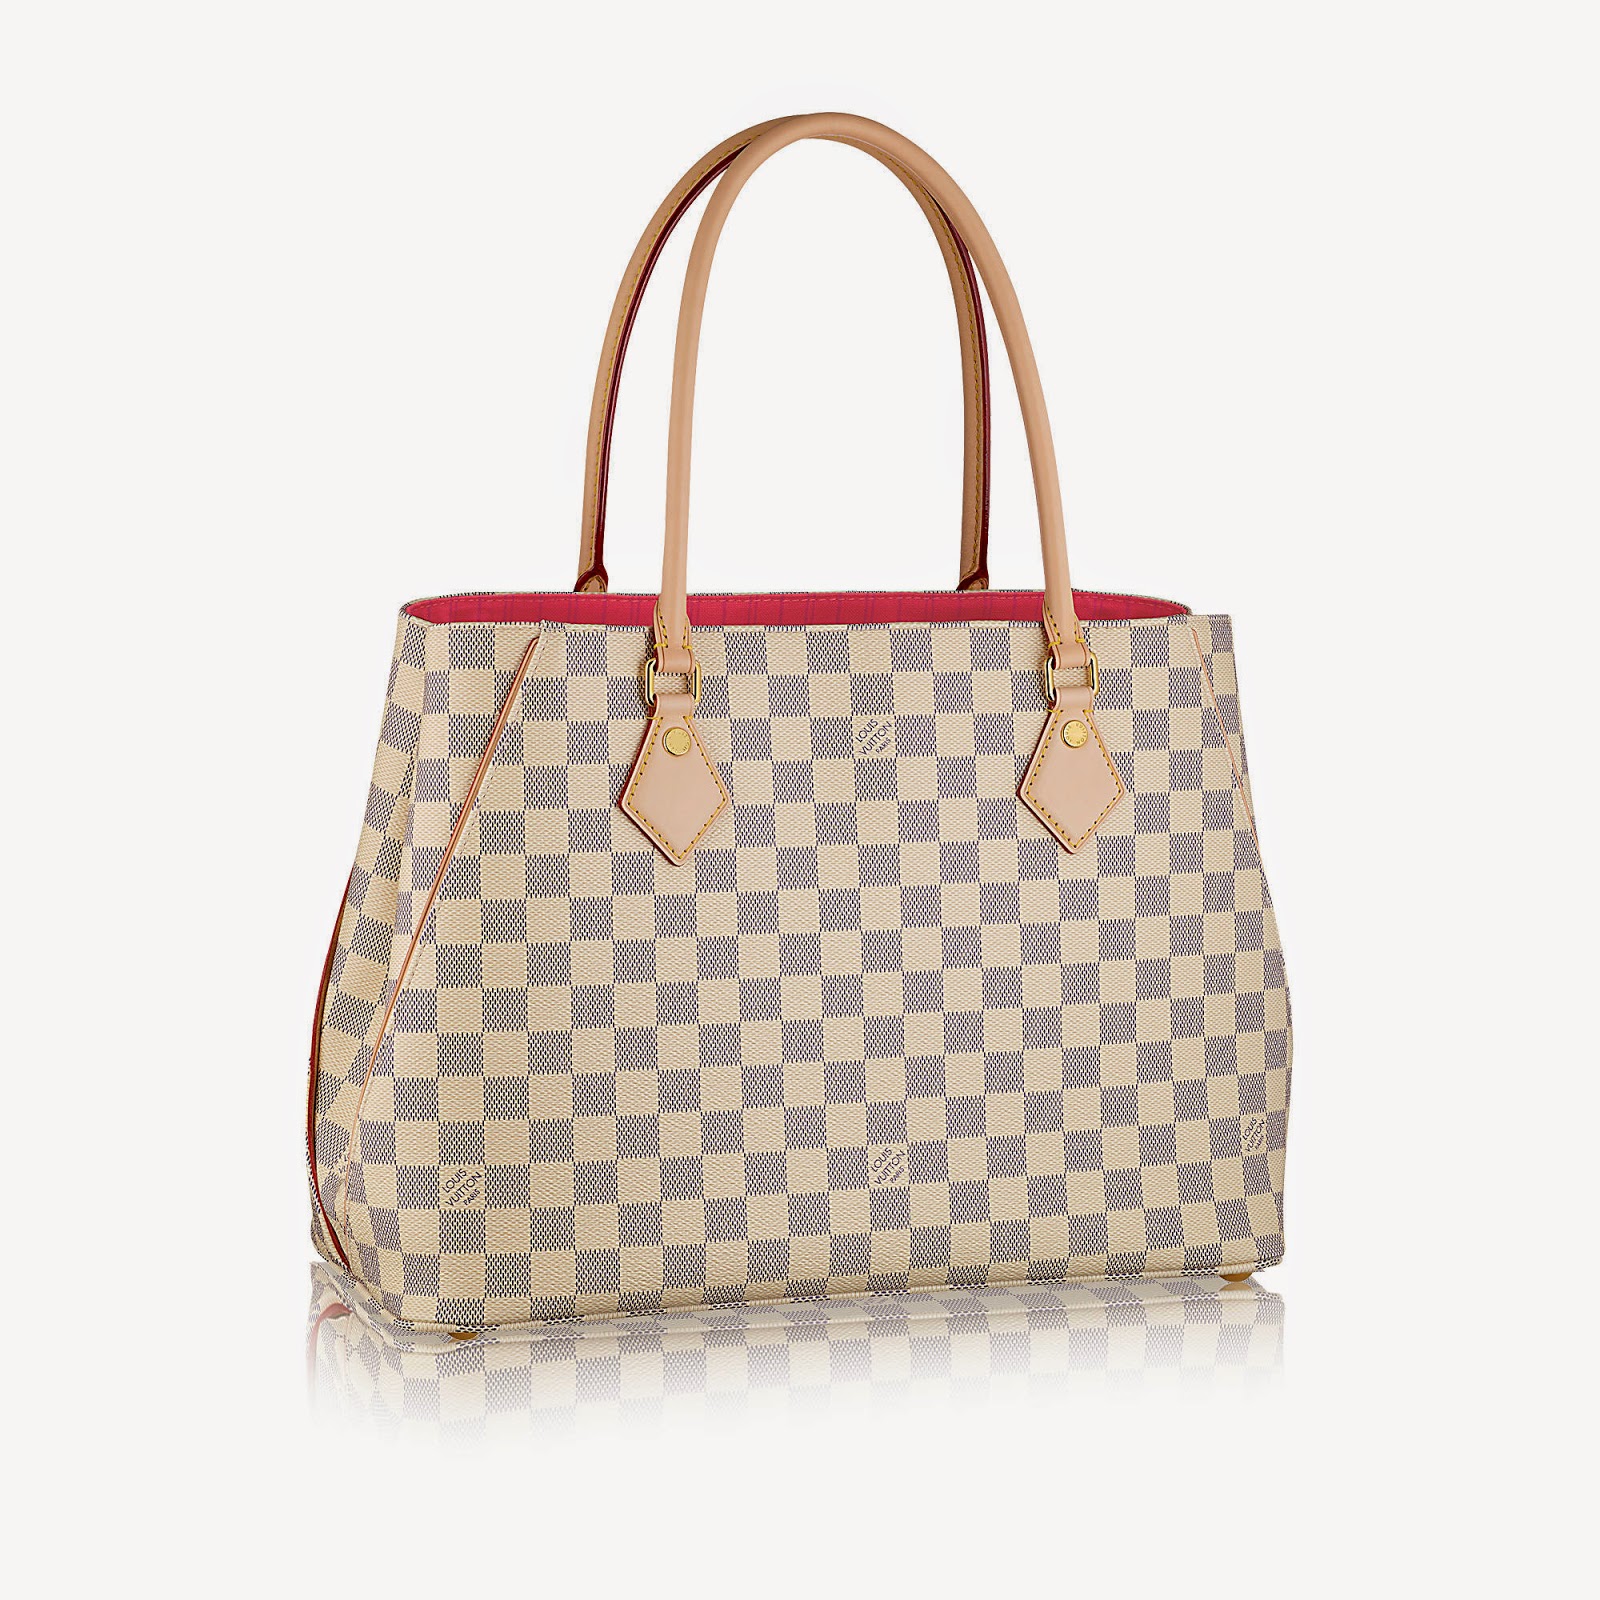 Are Lv Bags Less Expensive In Paris